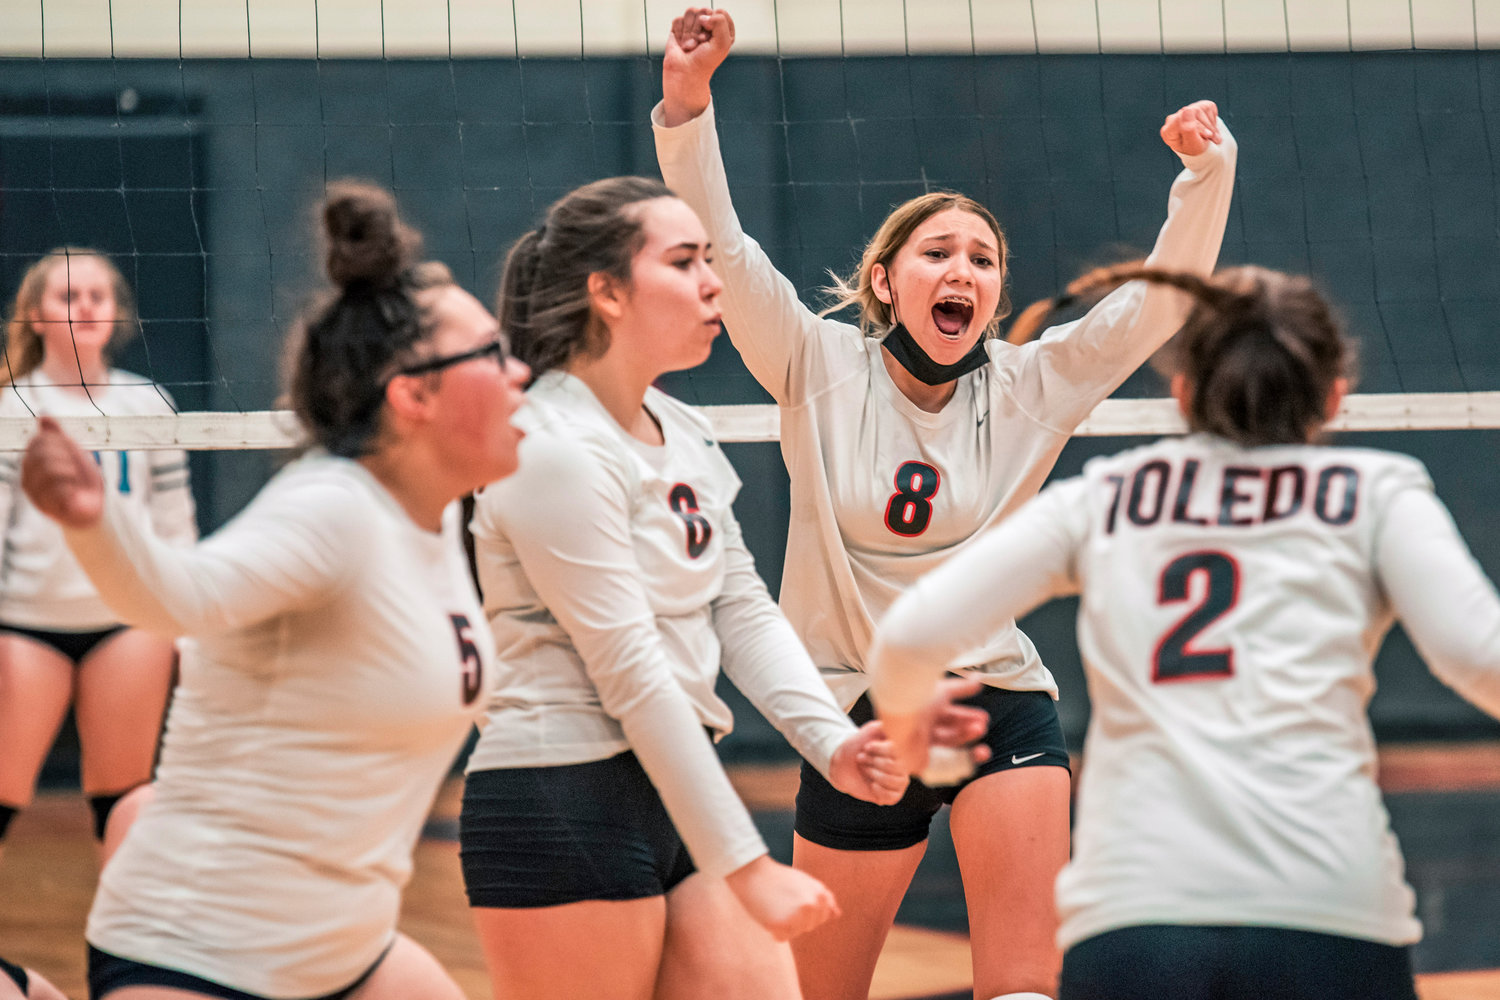 Toledo’s Jordynne Hensley (8) cheers with teammates after a score during a game Tuesday night against Stevenson.